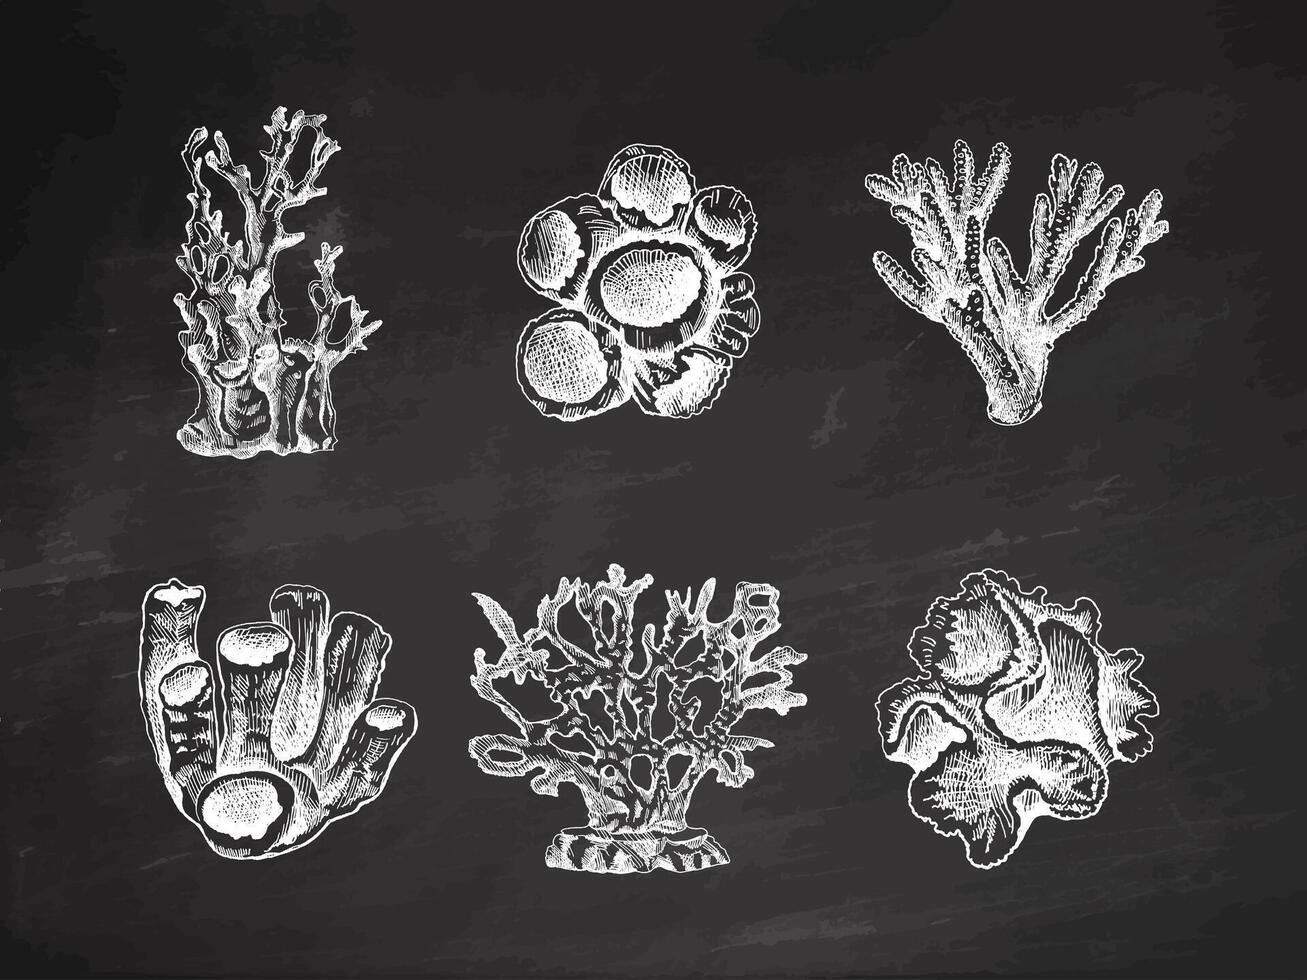 Hand-drawn sketch set of various corals on chalkboard background. Tropical reef elements. Vector engraved illustrations. Best for nautical designs.